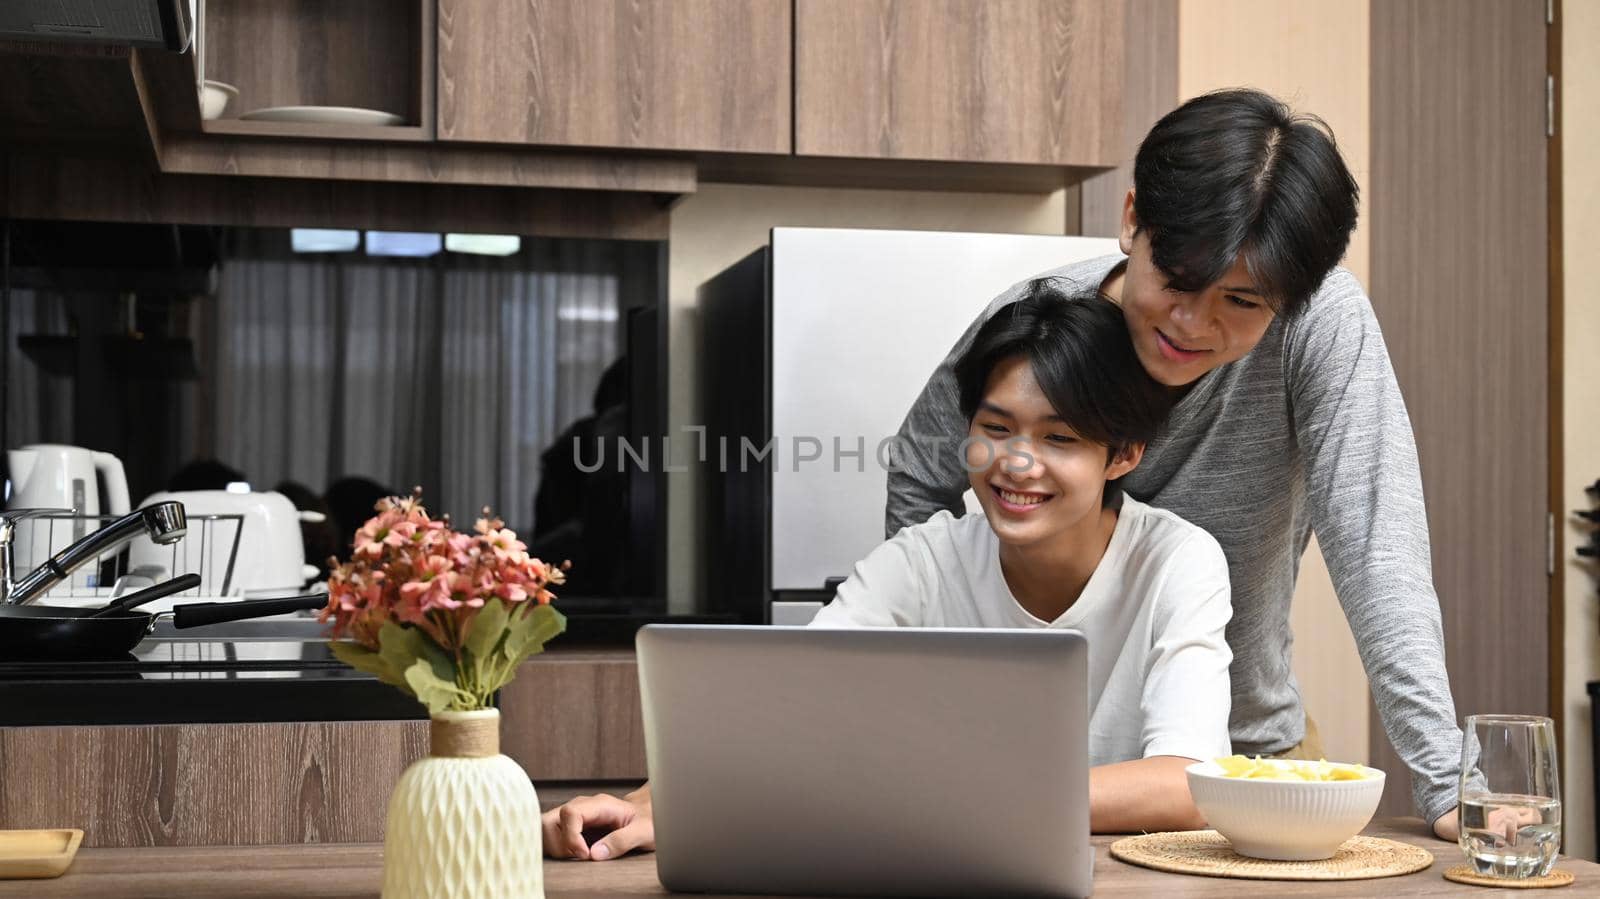 Adorable gay couple spending time, surfing internet on laptop together at kitchen table. LGBT, pride, relationships and equality concept by prathanchorruangsak